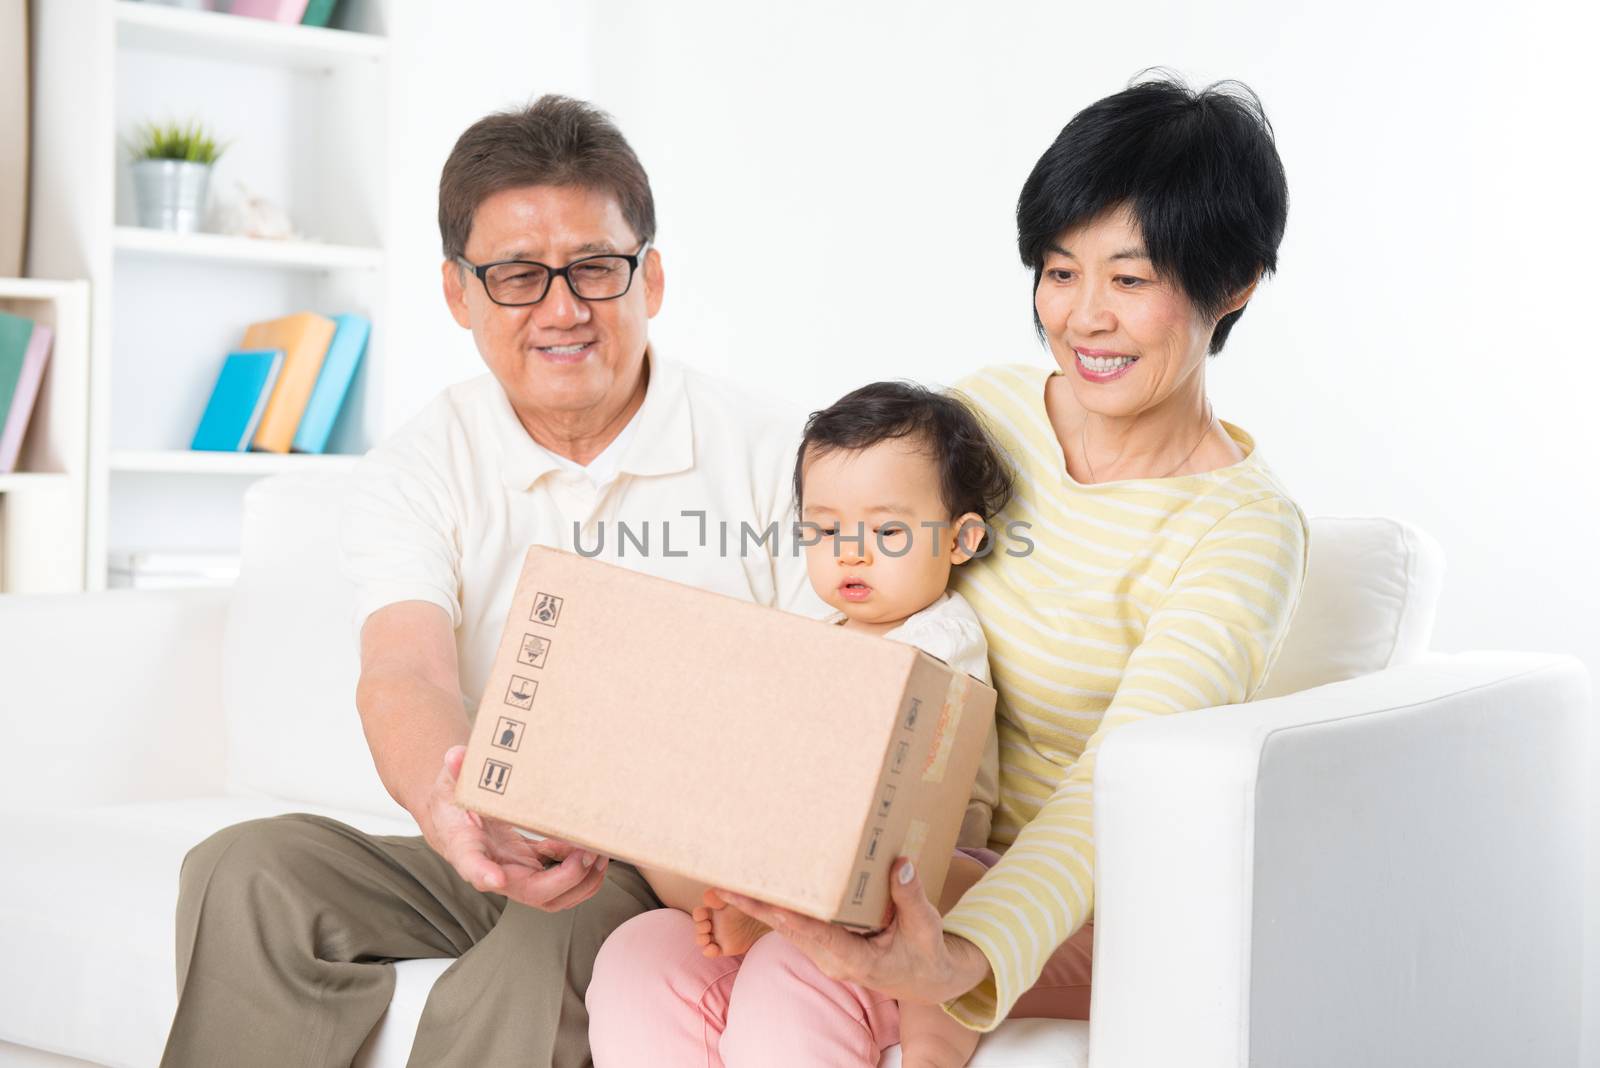 Asian family received an express courier parcel and open it at home, grandparents and grandchild living lifestyle indoor.